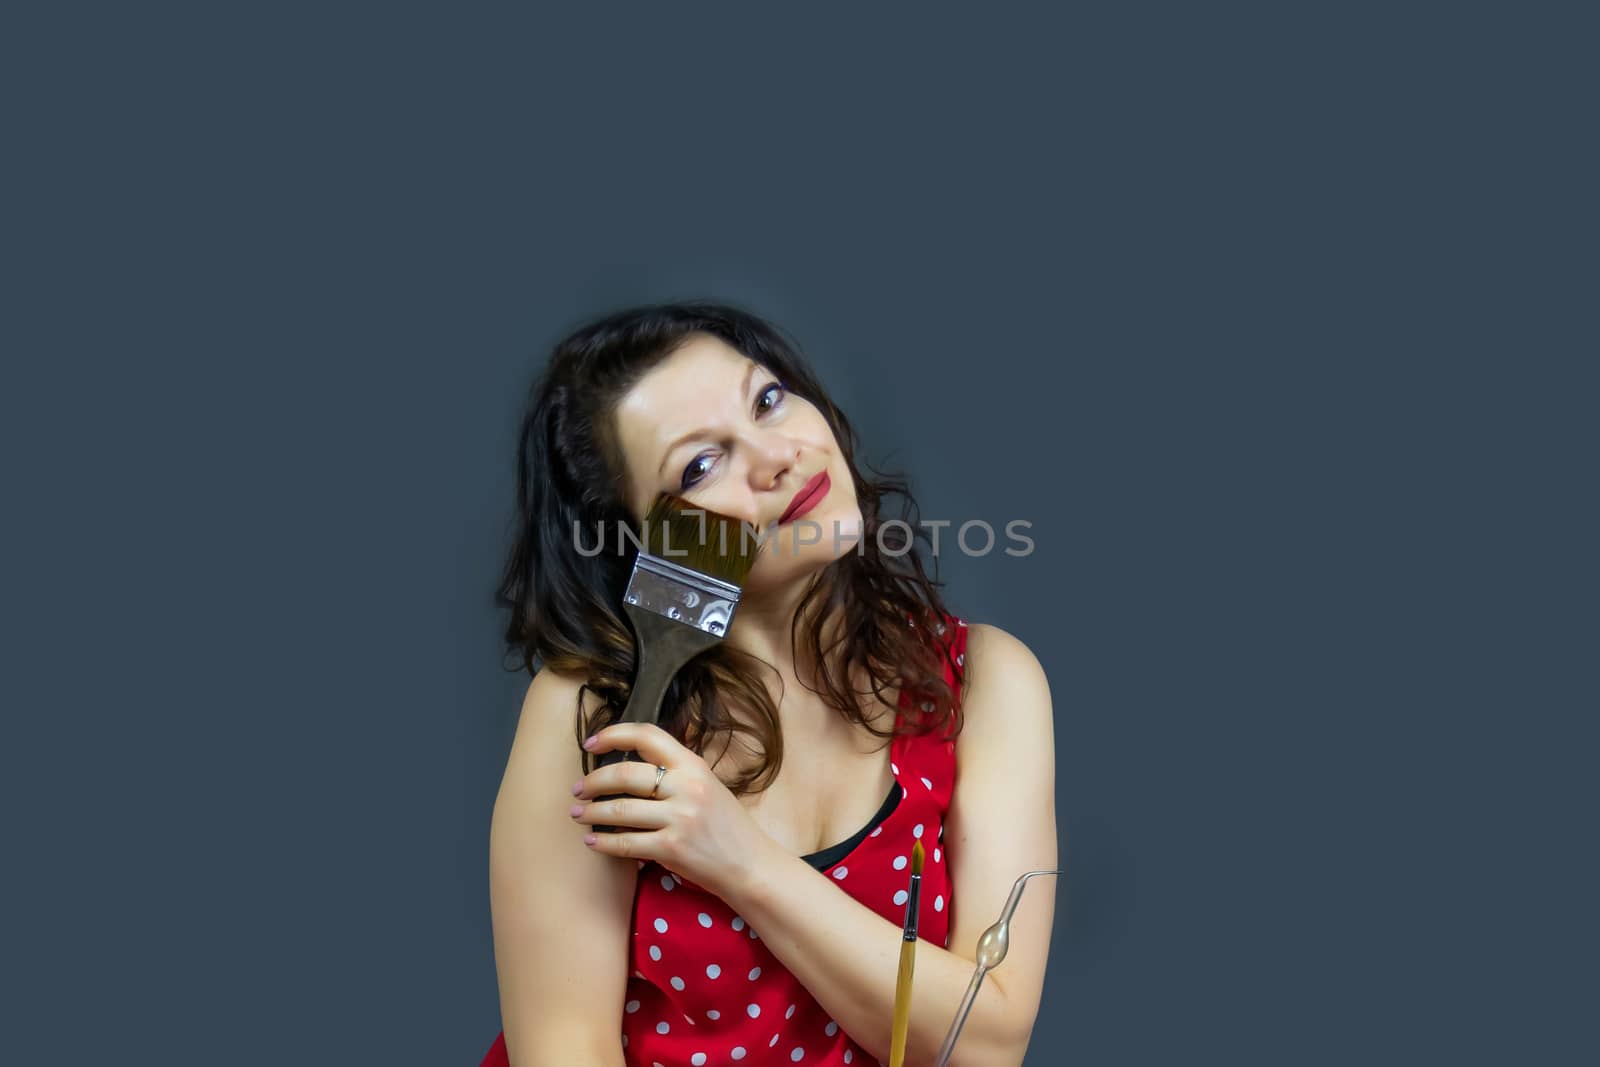 Portrait of a beautiful, fashionable middle-aged woman with long dark hair in a red dress, holding a paintbrush and posing on a dark gray background. Free space to copy your design.